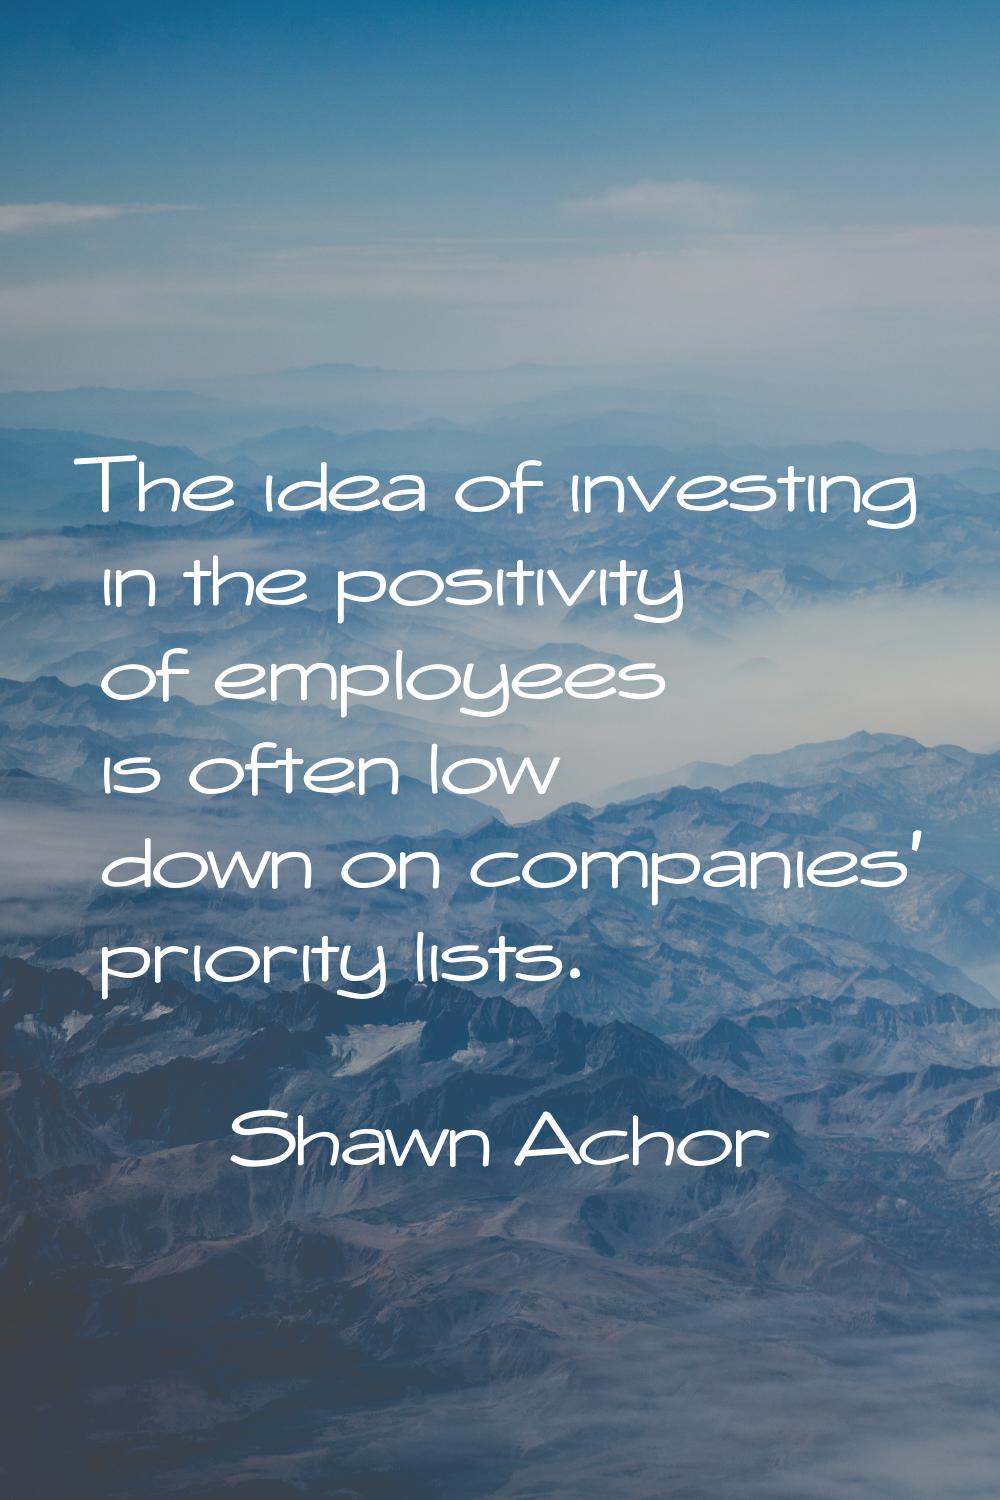 The idea of investing in the positivity of employees is often low down on companies' priority lists